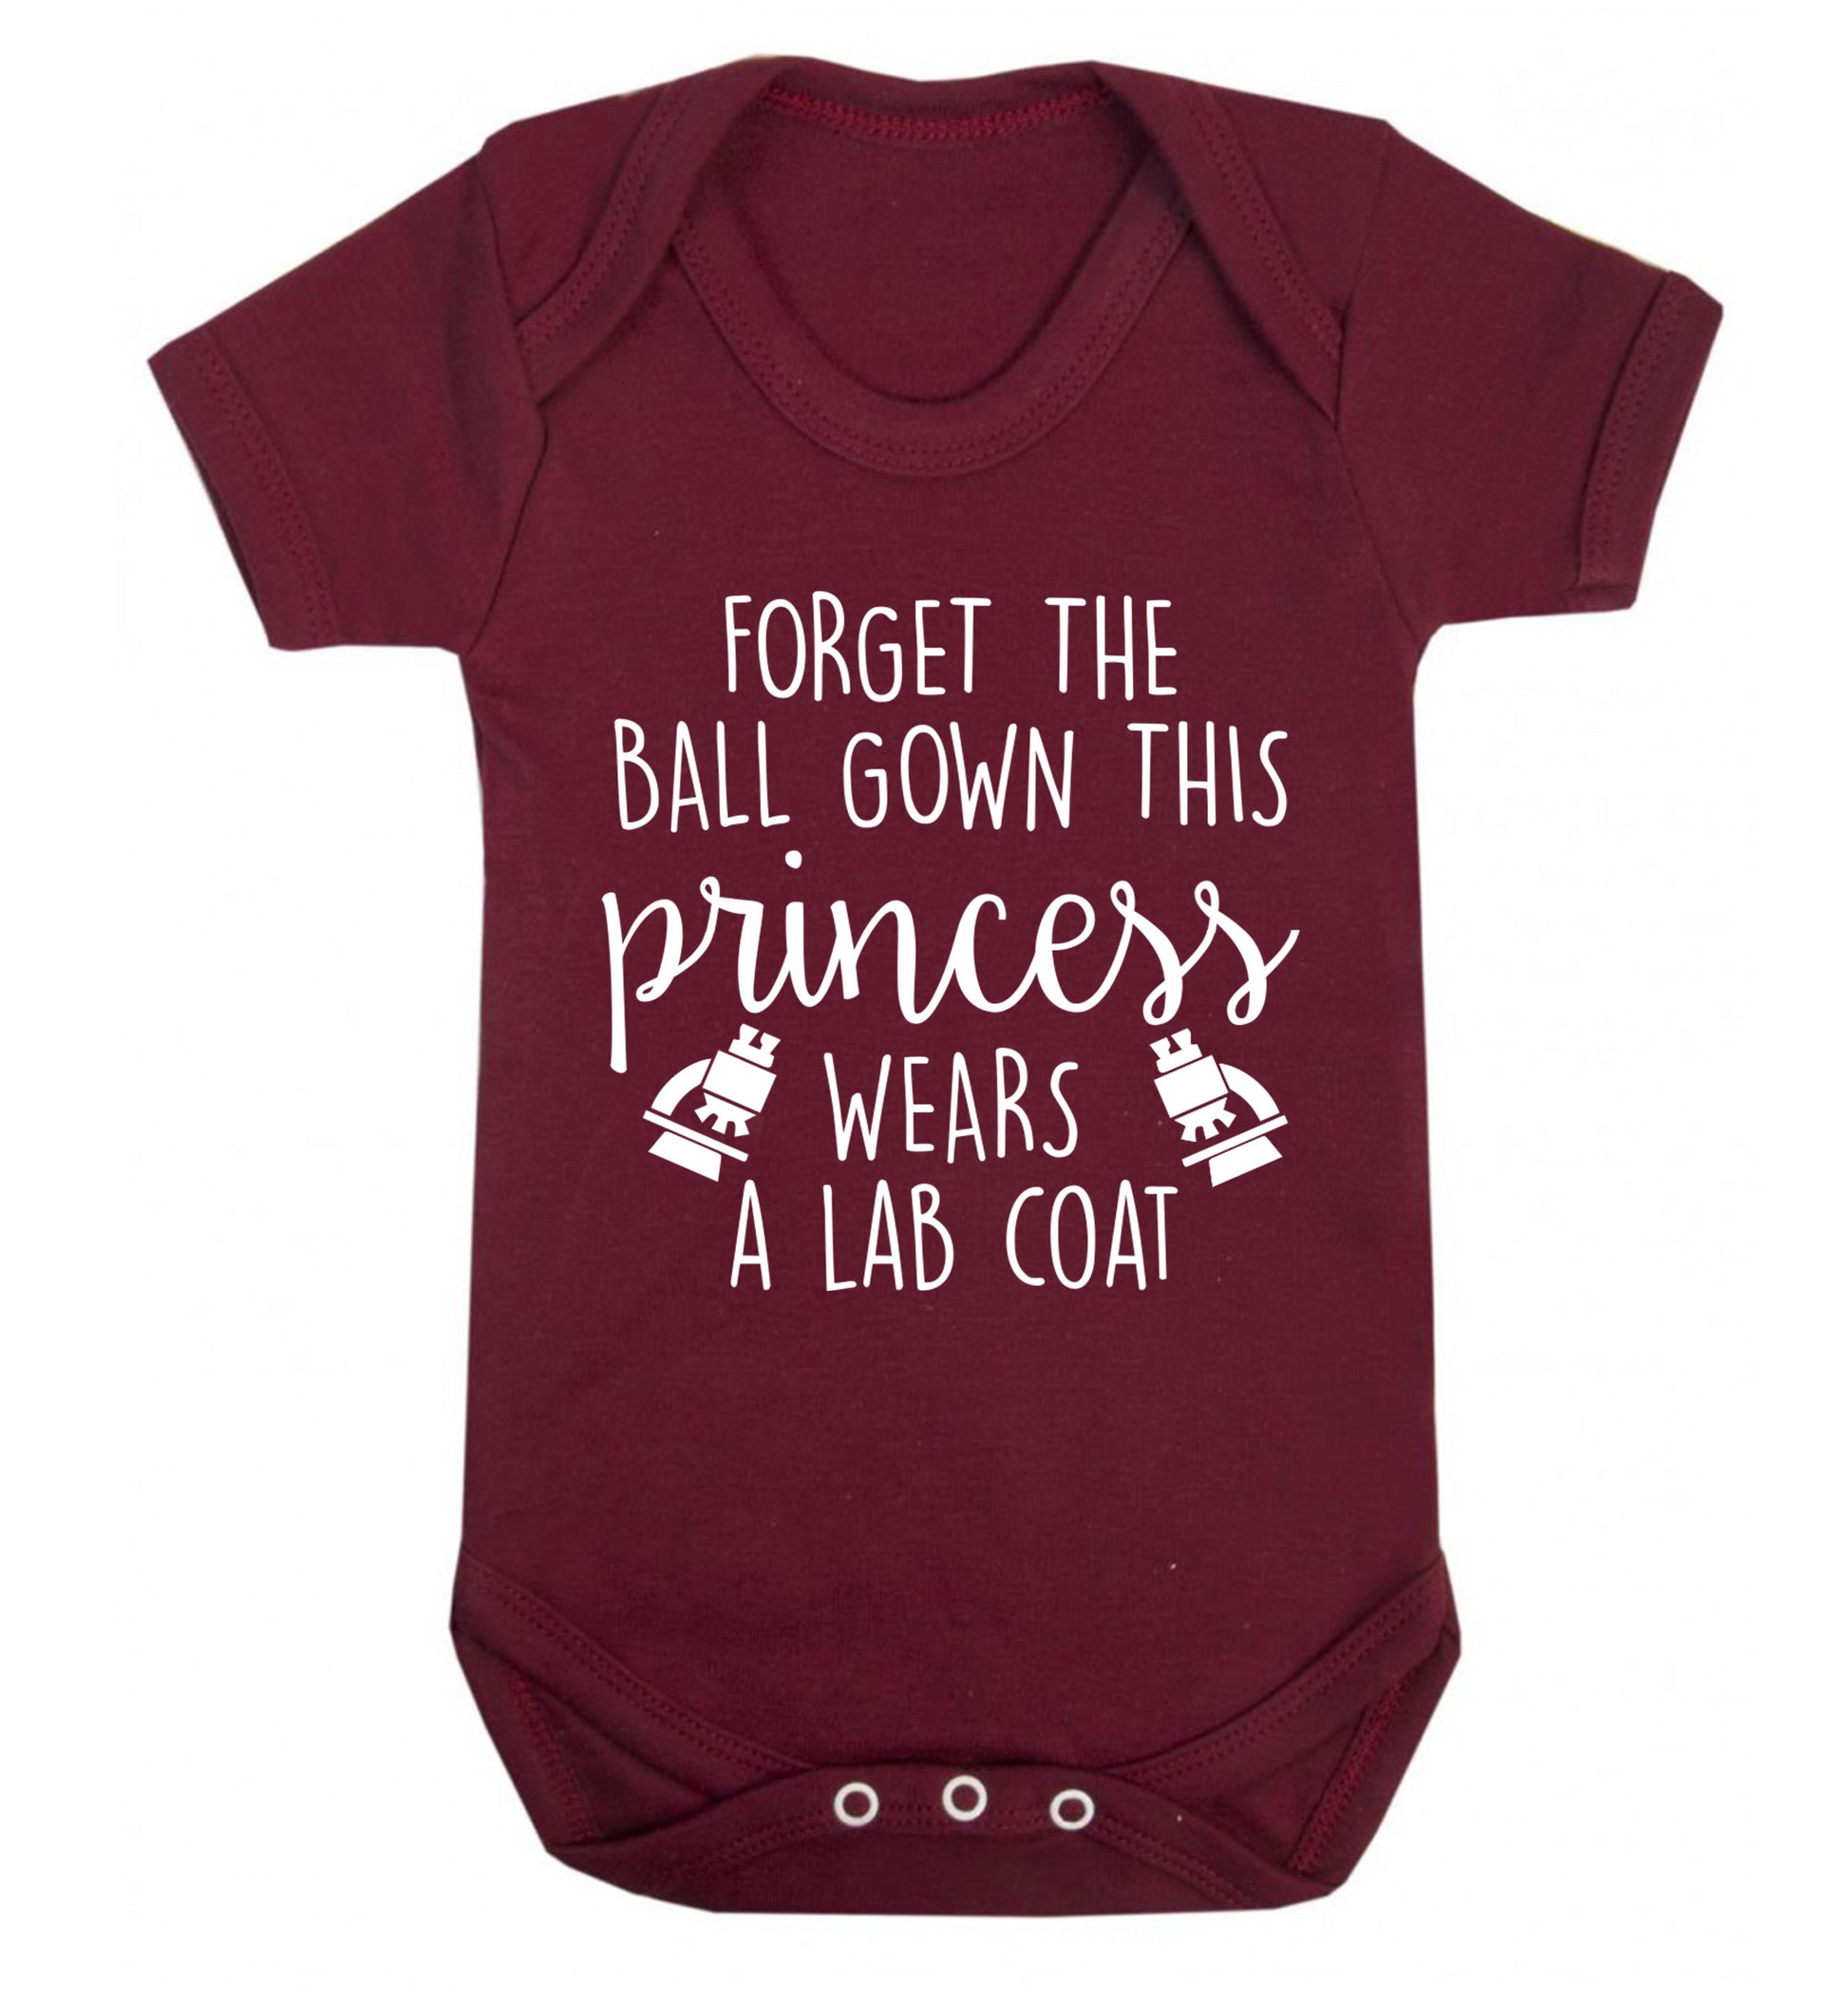 Forget the ball gown this princess wears a lab coat Baby Vest maroon 18-24 months